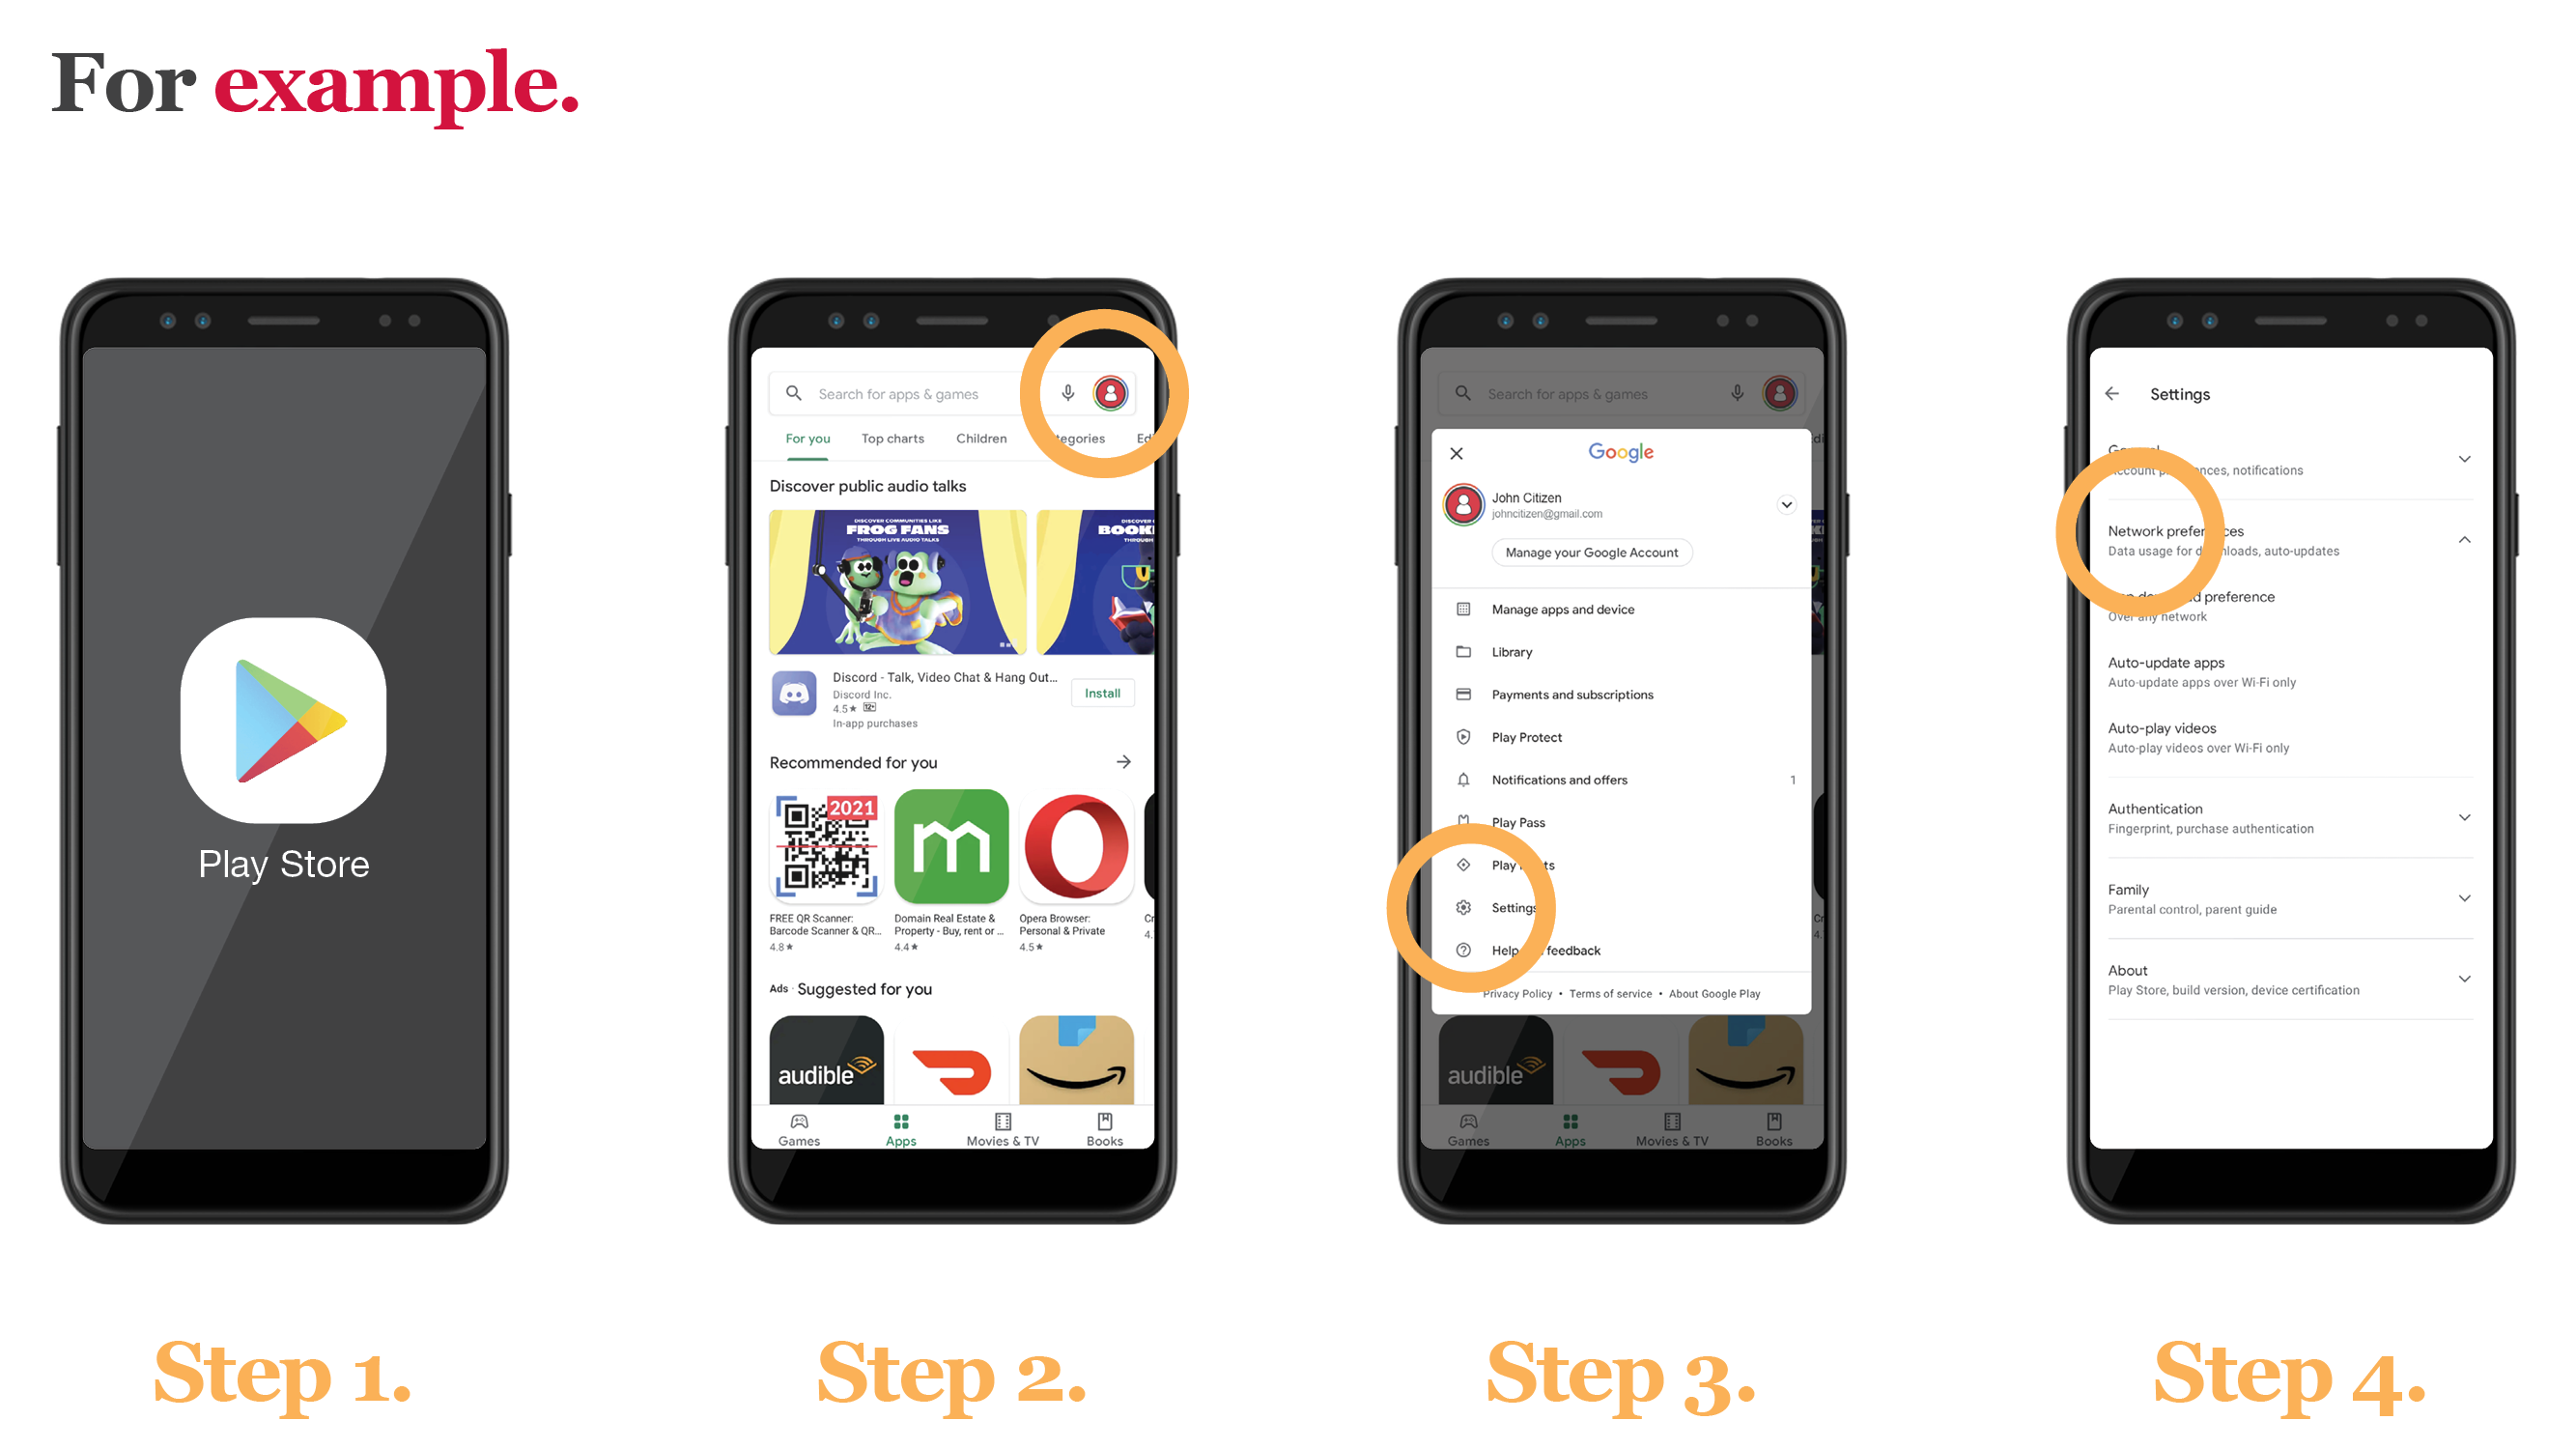 For example: Step 1. Open the Google Play Store app. Step 2. At the top right, tap on the profile icon. Step 3. Tap Settings. Step 4. Tap Network Preferences and then Auto-update apps.